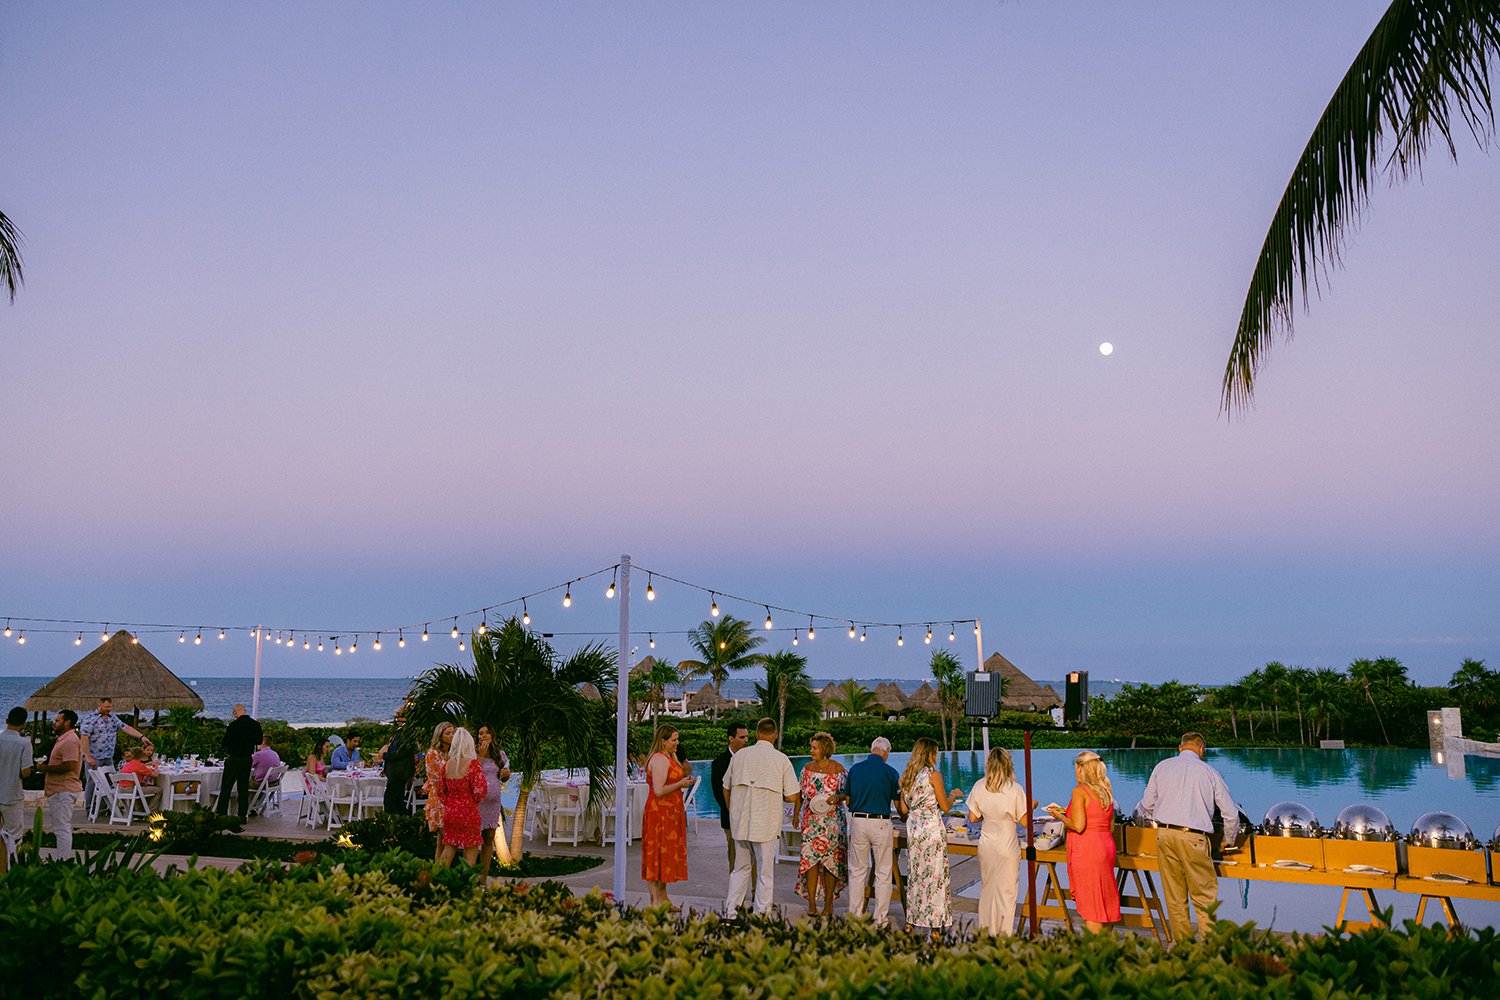 13 Rehearsal dinner guests enjoy the weather and serve themselves from the buffet with ocean views of the purple sunset behind at Dreams Riviera Cancun Mexico.JPG